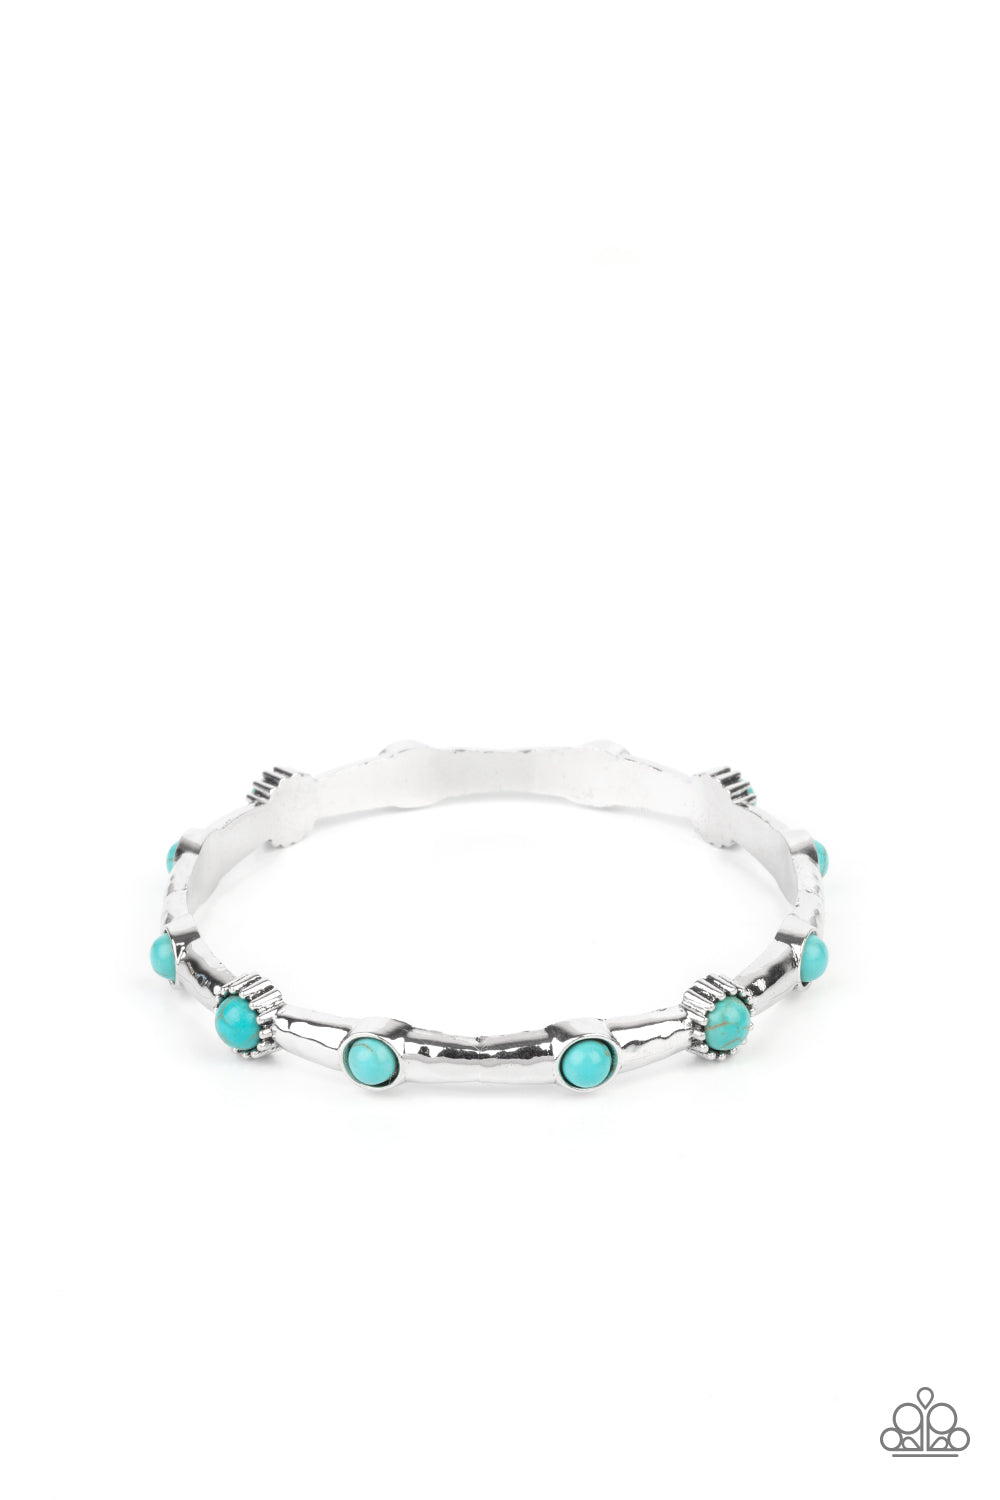 &amp;lt;P&amp;gt; Dotted with dainty turquoise stones, a hammered silver bangle glides along the wrist for a colorfully earthy look.&amp;lt;/P&amp;gt;  

&amp;lt;P&amp;gt; &amp;lt;I&amp;gt;Sold as one individual bracelet.&amp;lt;/I&amp;gt;  &amp;lt;/P&amp;gt;


&amp;lt;img src=\&quot;https://d9b54x484lq62.cloudfront.net/paparazzi/shopping/images/517_tag150x115_1.png\&quot; alt=\&quot;New Kit\&quot; align=\&quot;middle\&quot; height=\&quot;50\&quot; width=\&quot;50\&quot;/&amp;gt;